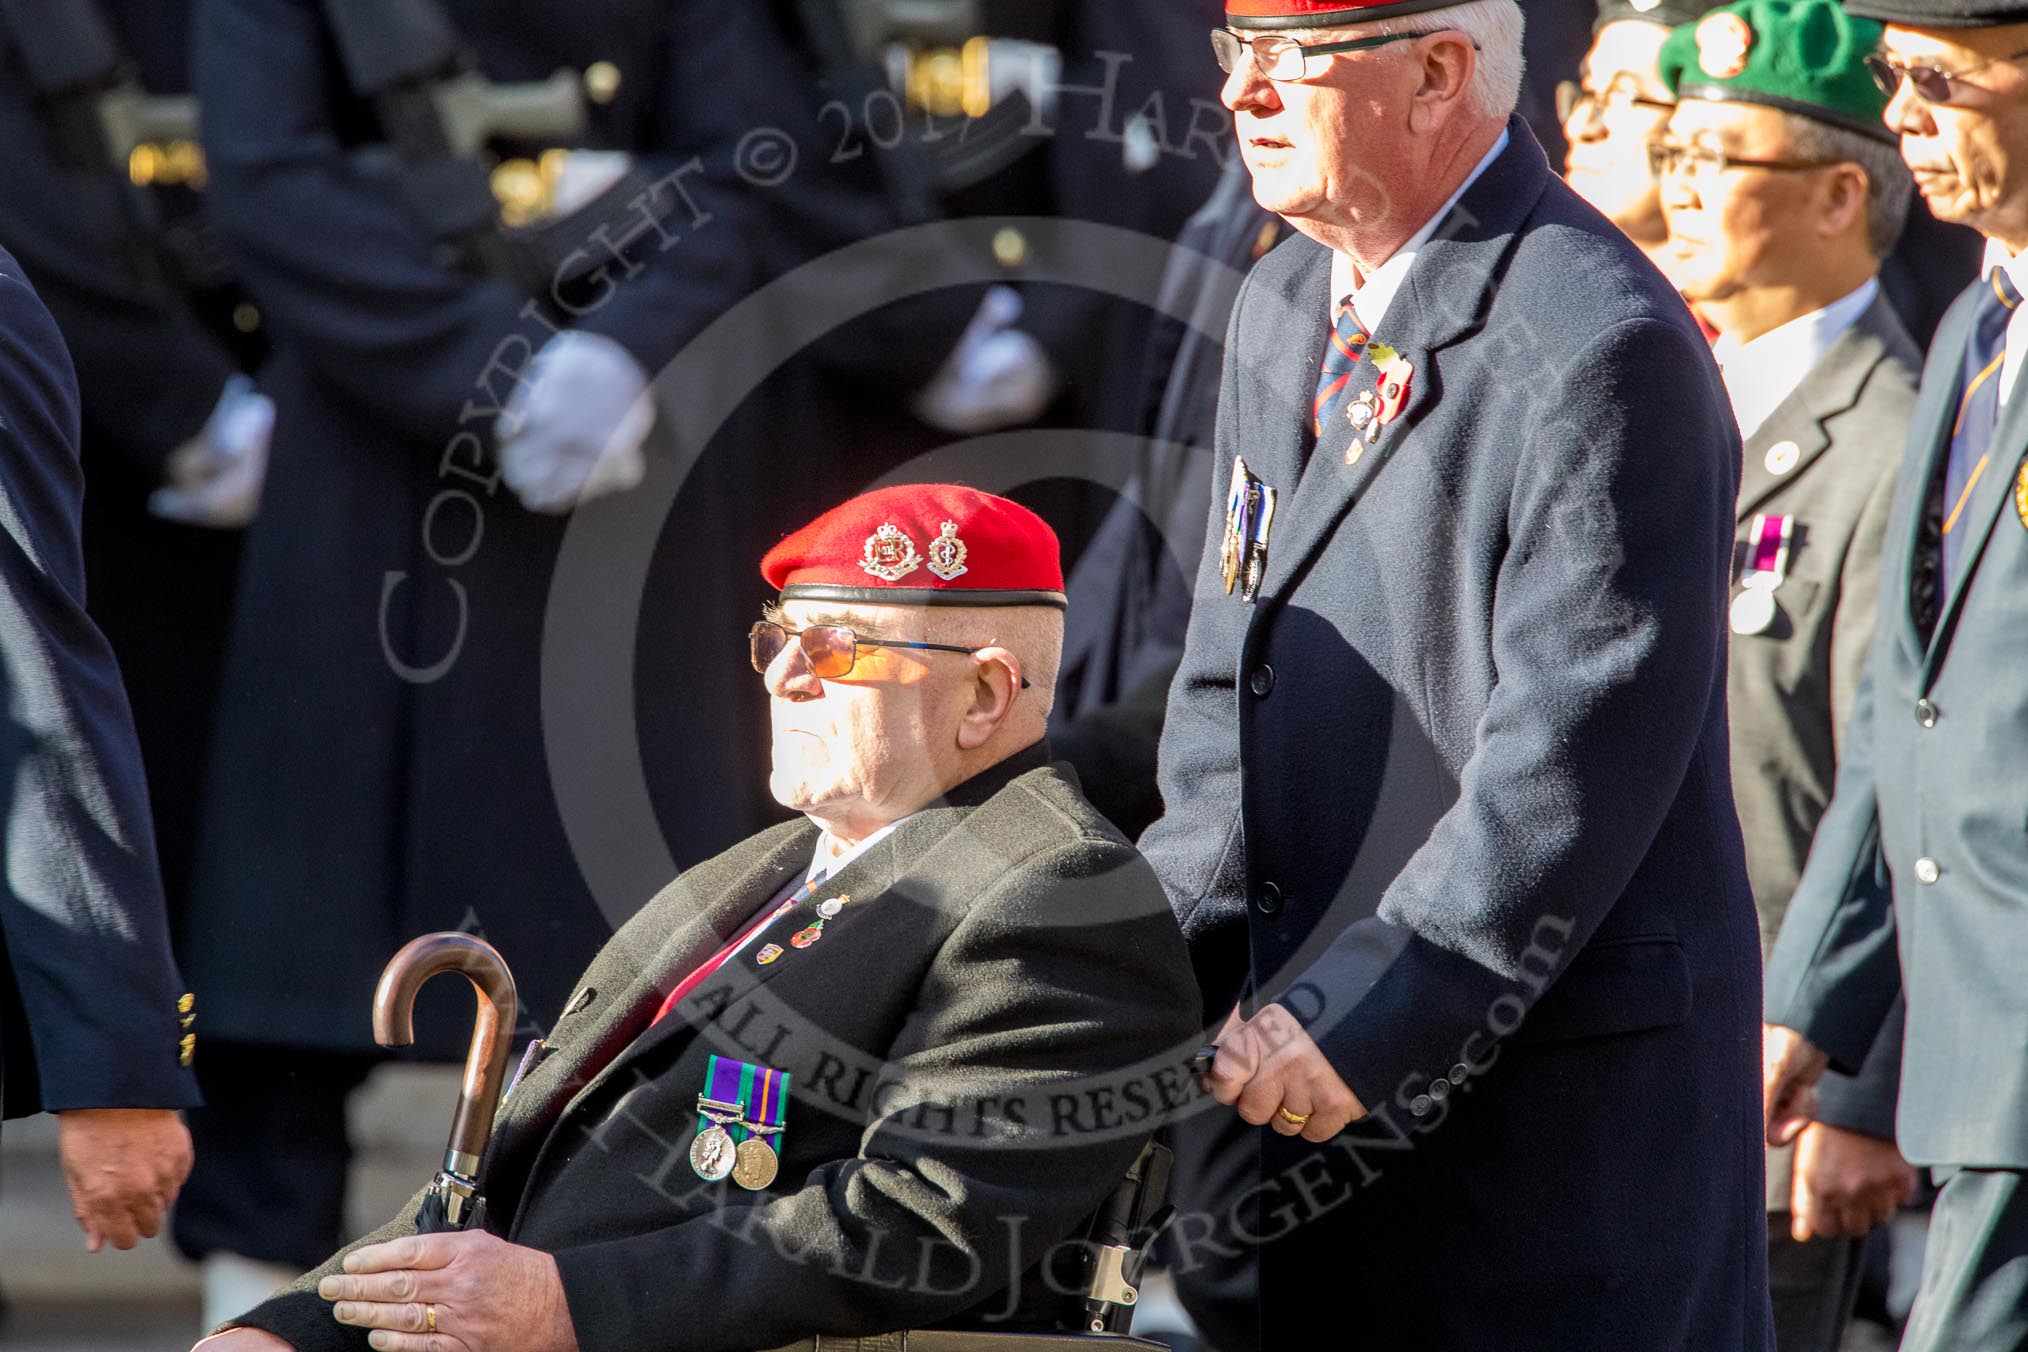 The Hong Kong Ex-Servicemen's Association  (UK Branch) (Group D22, 24 members) during the Royal British Legion March Past on Remembrance Sunday at the Cenotaph, Whitehall, Westminster, London, 11 November 2018, 12:24.